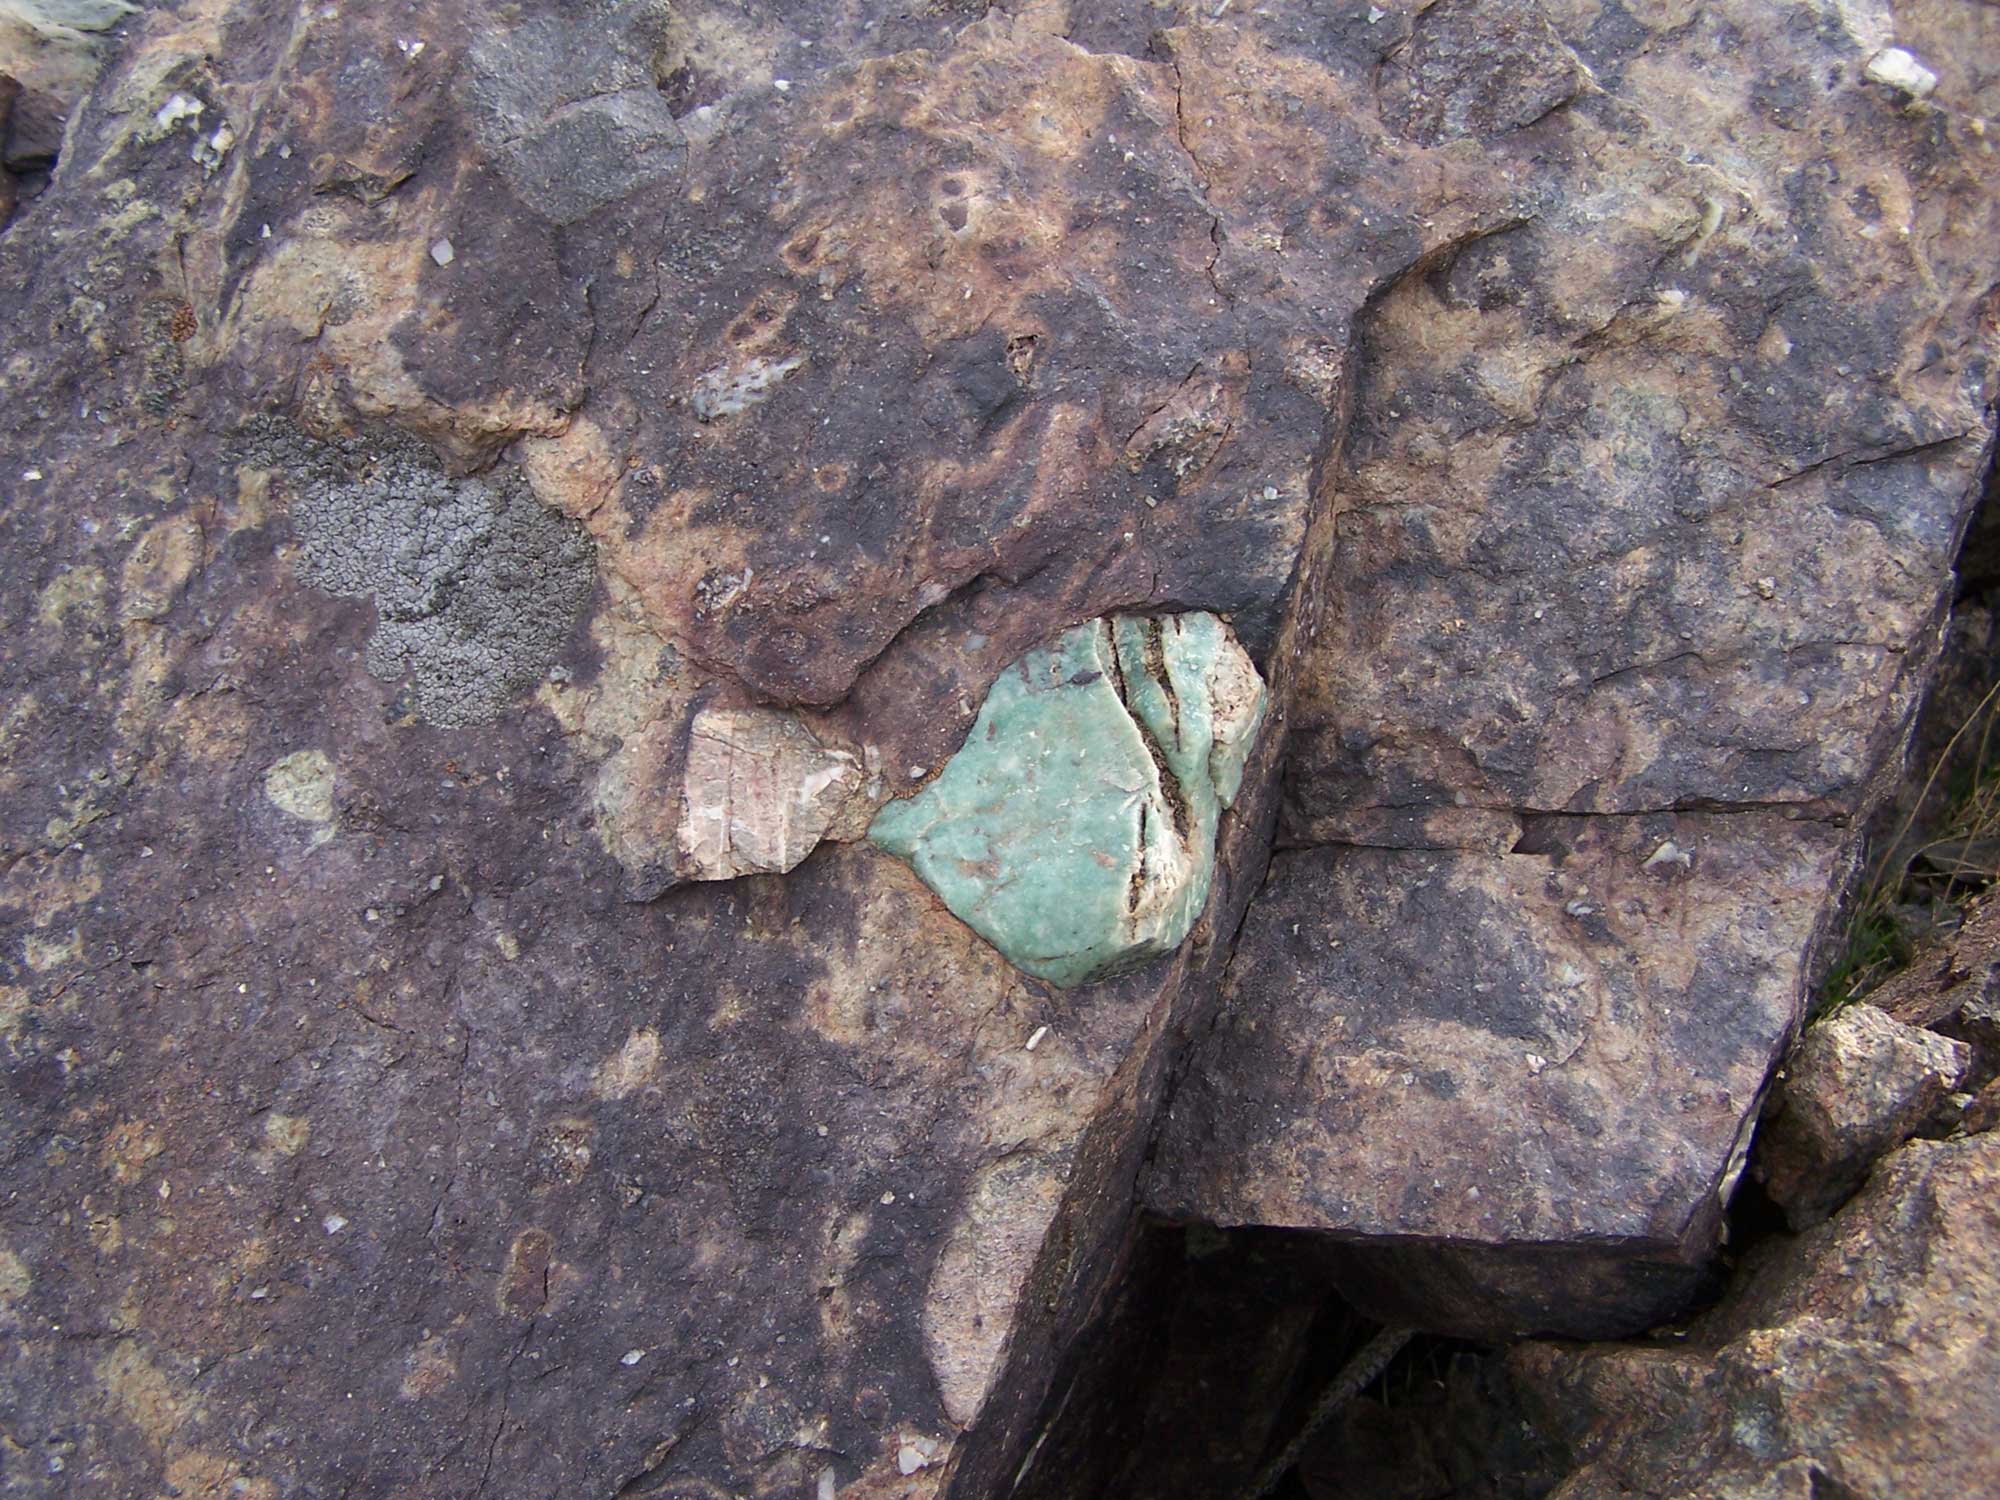 Photograph of tillite from the Mineral Fork Formation, Antelope Island, Utah. The photo is a close-up showing a detail of the rock surface. Most of the surface is burgandy-brown, but there is a large green inclusion in the center of the image.